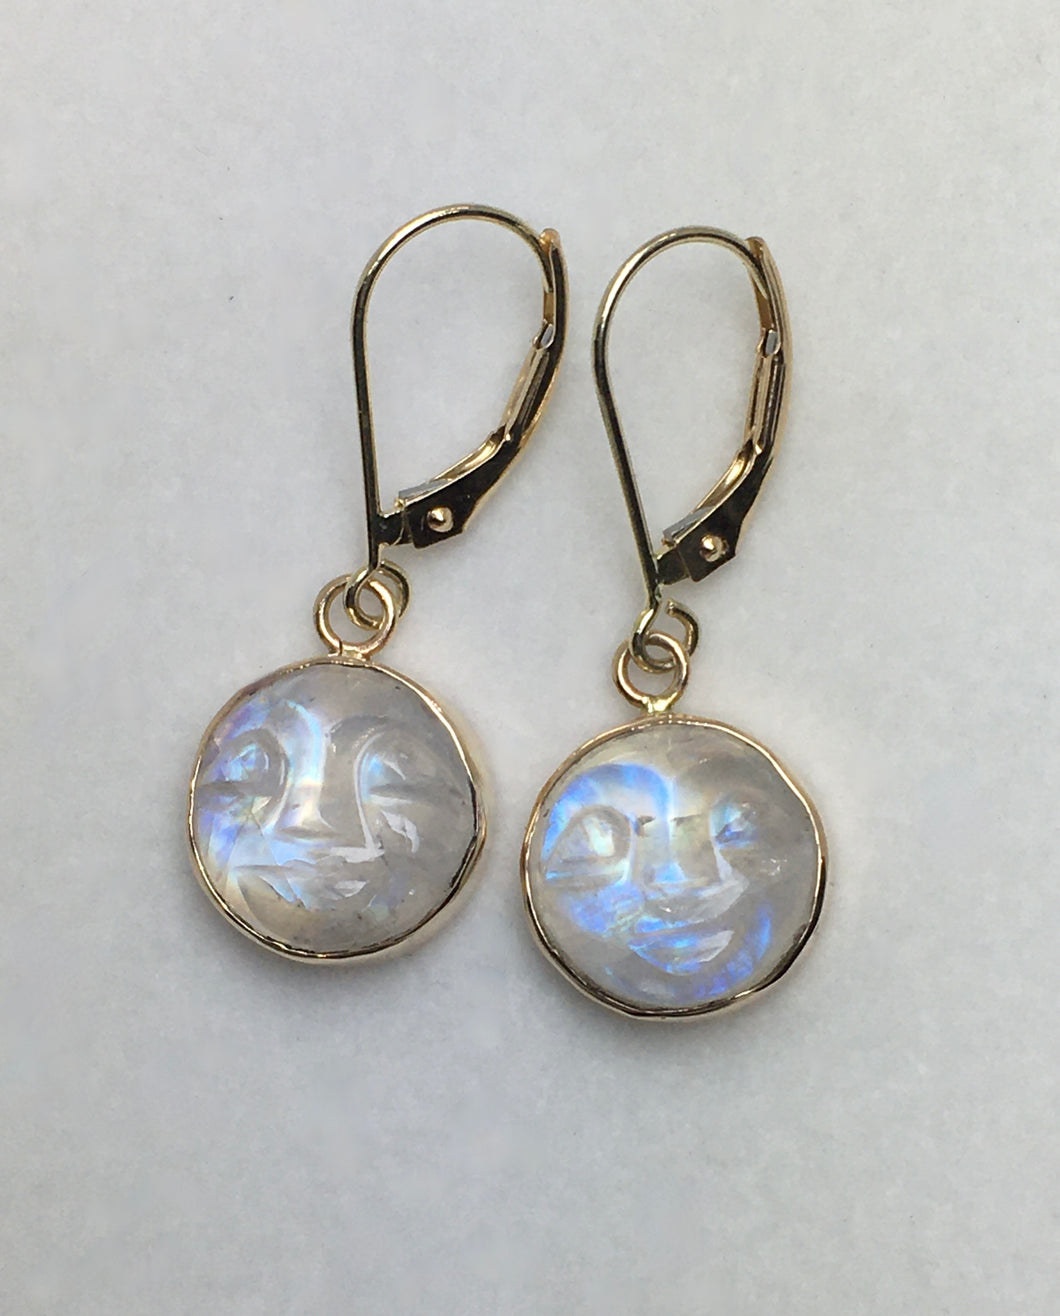 Rainbow Moonstone with Carved Faces Gumdrop Earrings